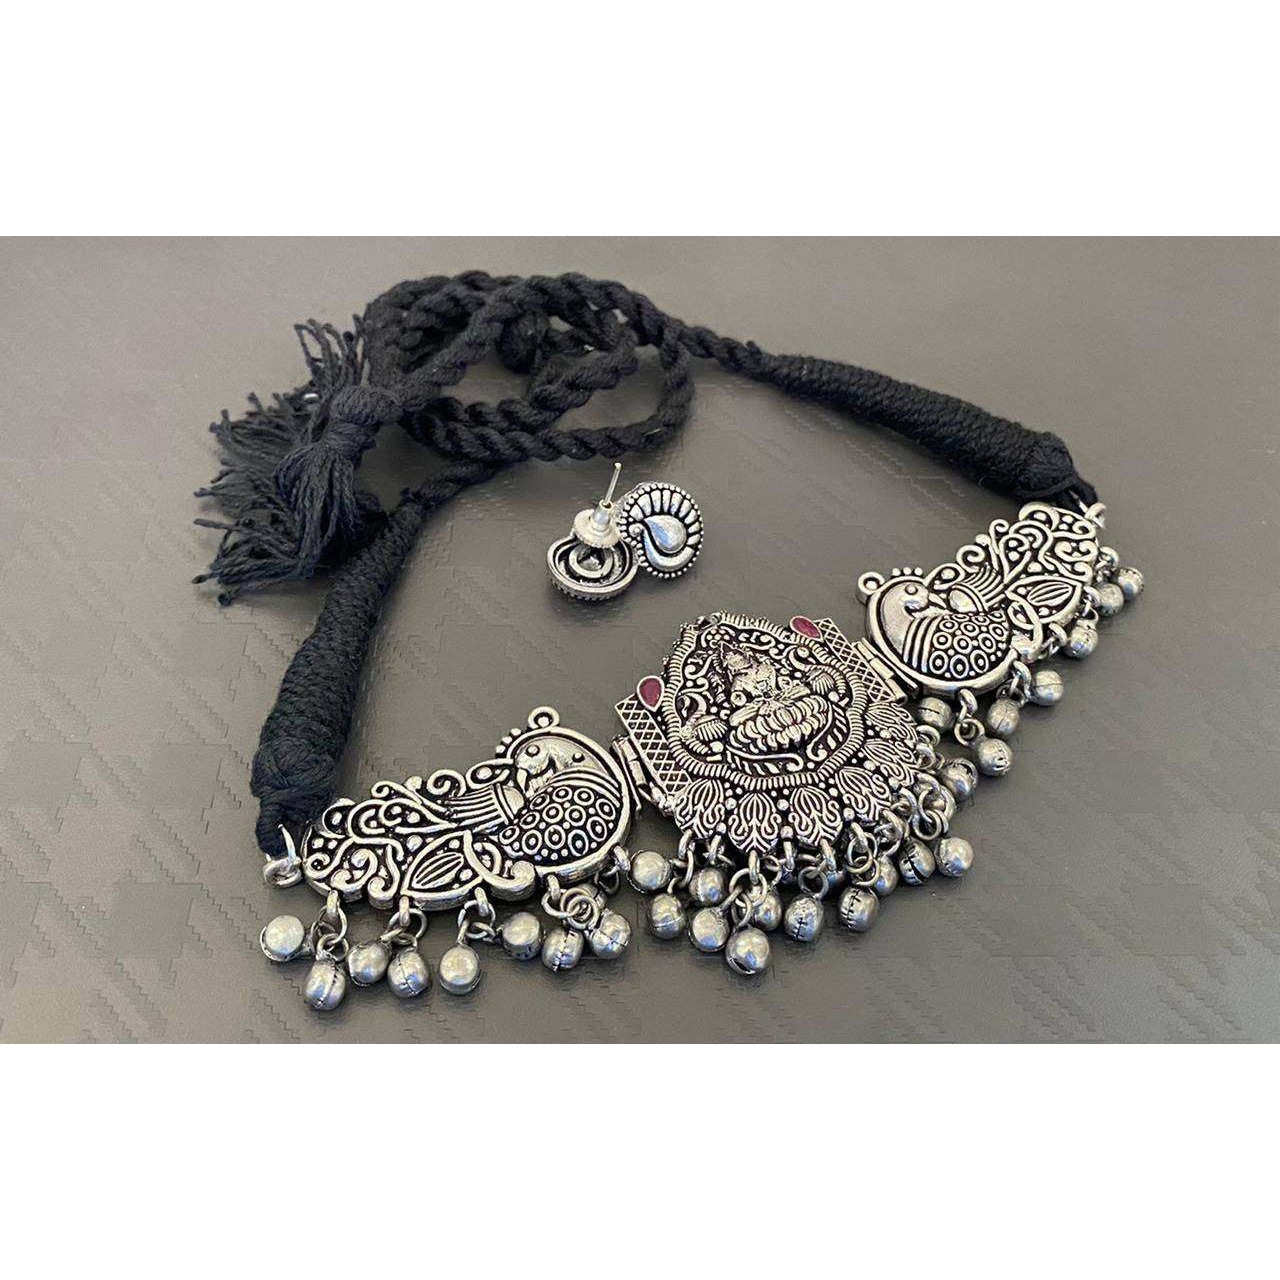 Oxidised indian kolhapuri choker jewelery, Silver look choker, antique choker, gifts for her, ethnic jewelry, red oxidized jewelry ghunghroo